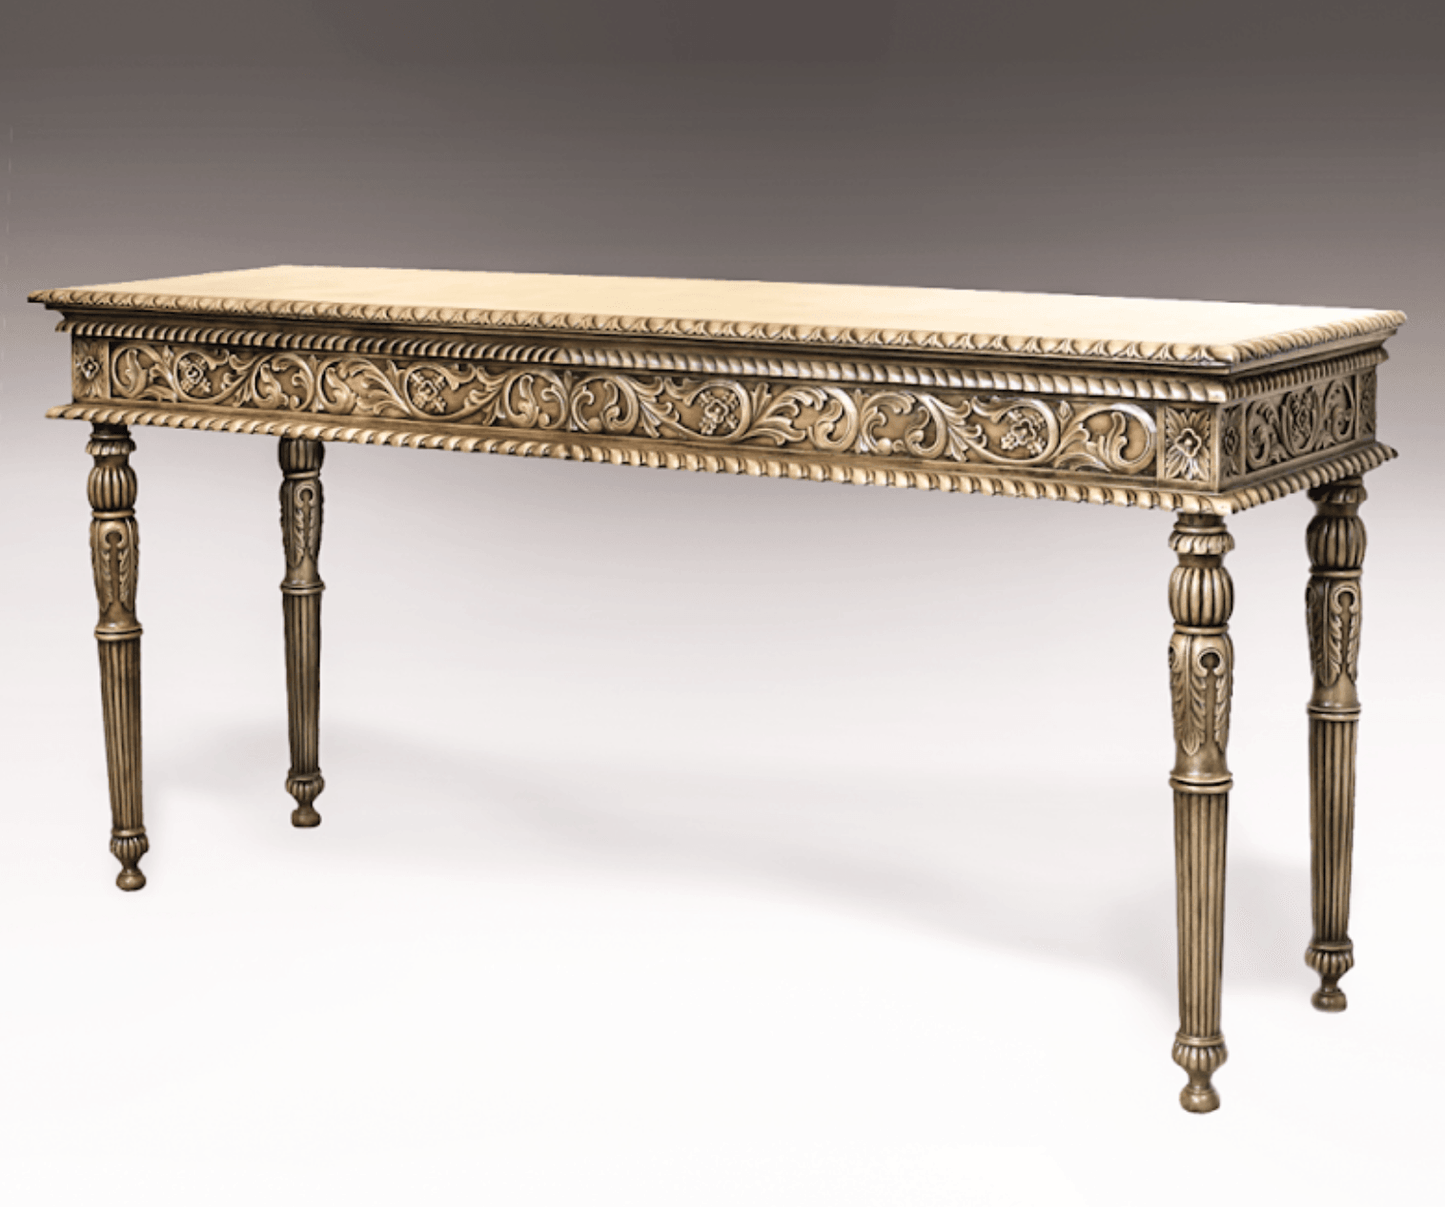 CARVED LOUIS XVI STYLE CONSOLE TABLE - House of Chippendale